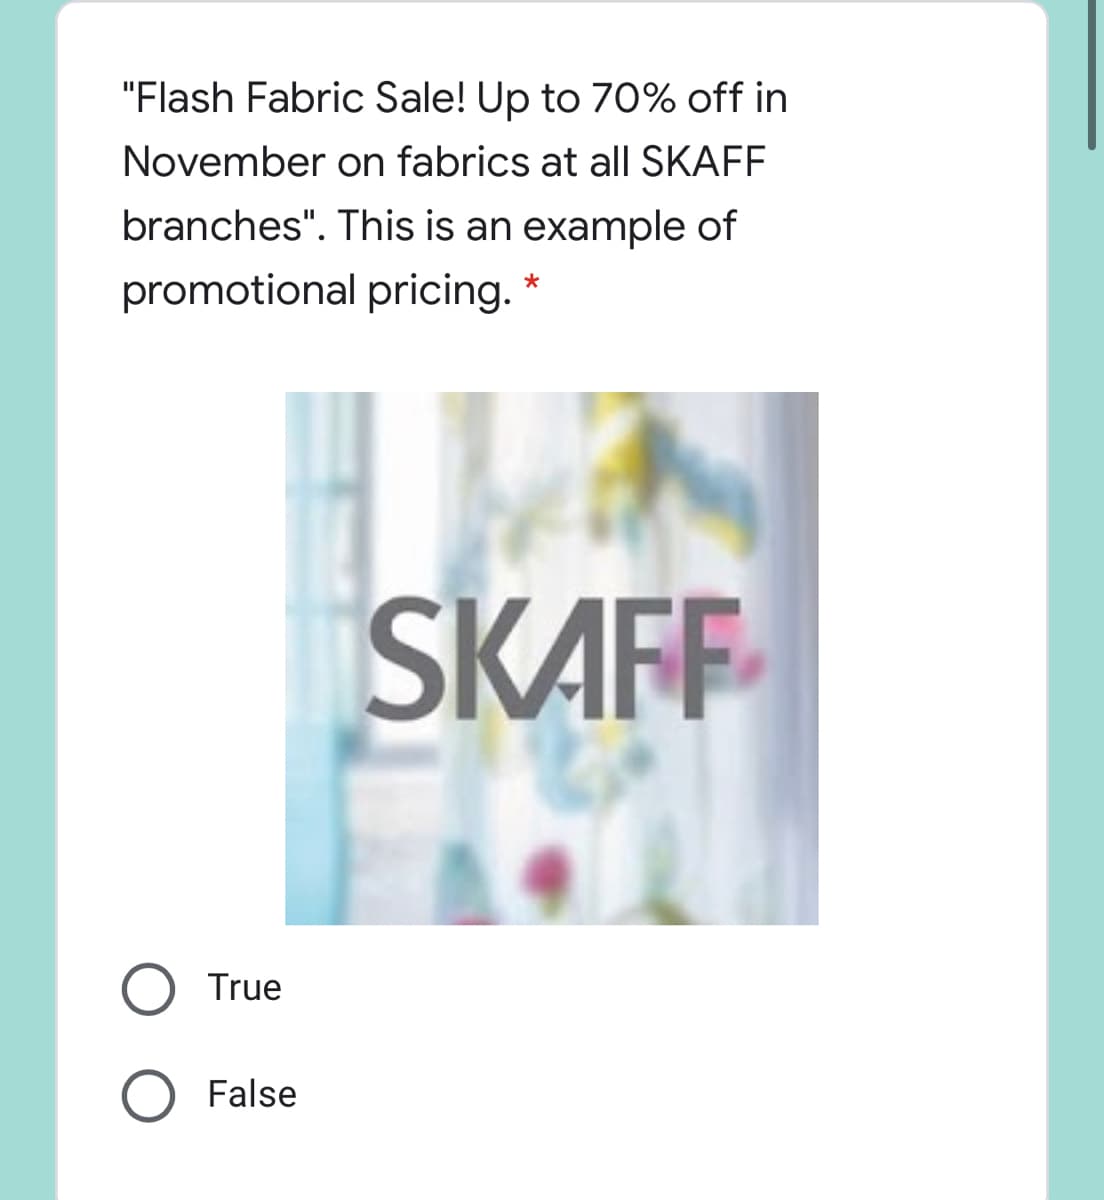 "Flash Fabric Sale! Up to 70% off in
November on fabrics at allI SKAFF
branches". This is an example of
promotional pricing.
SKAFF
True
False
